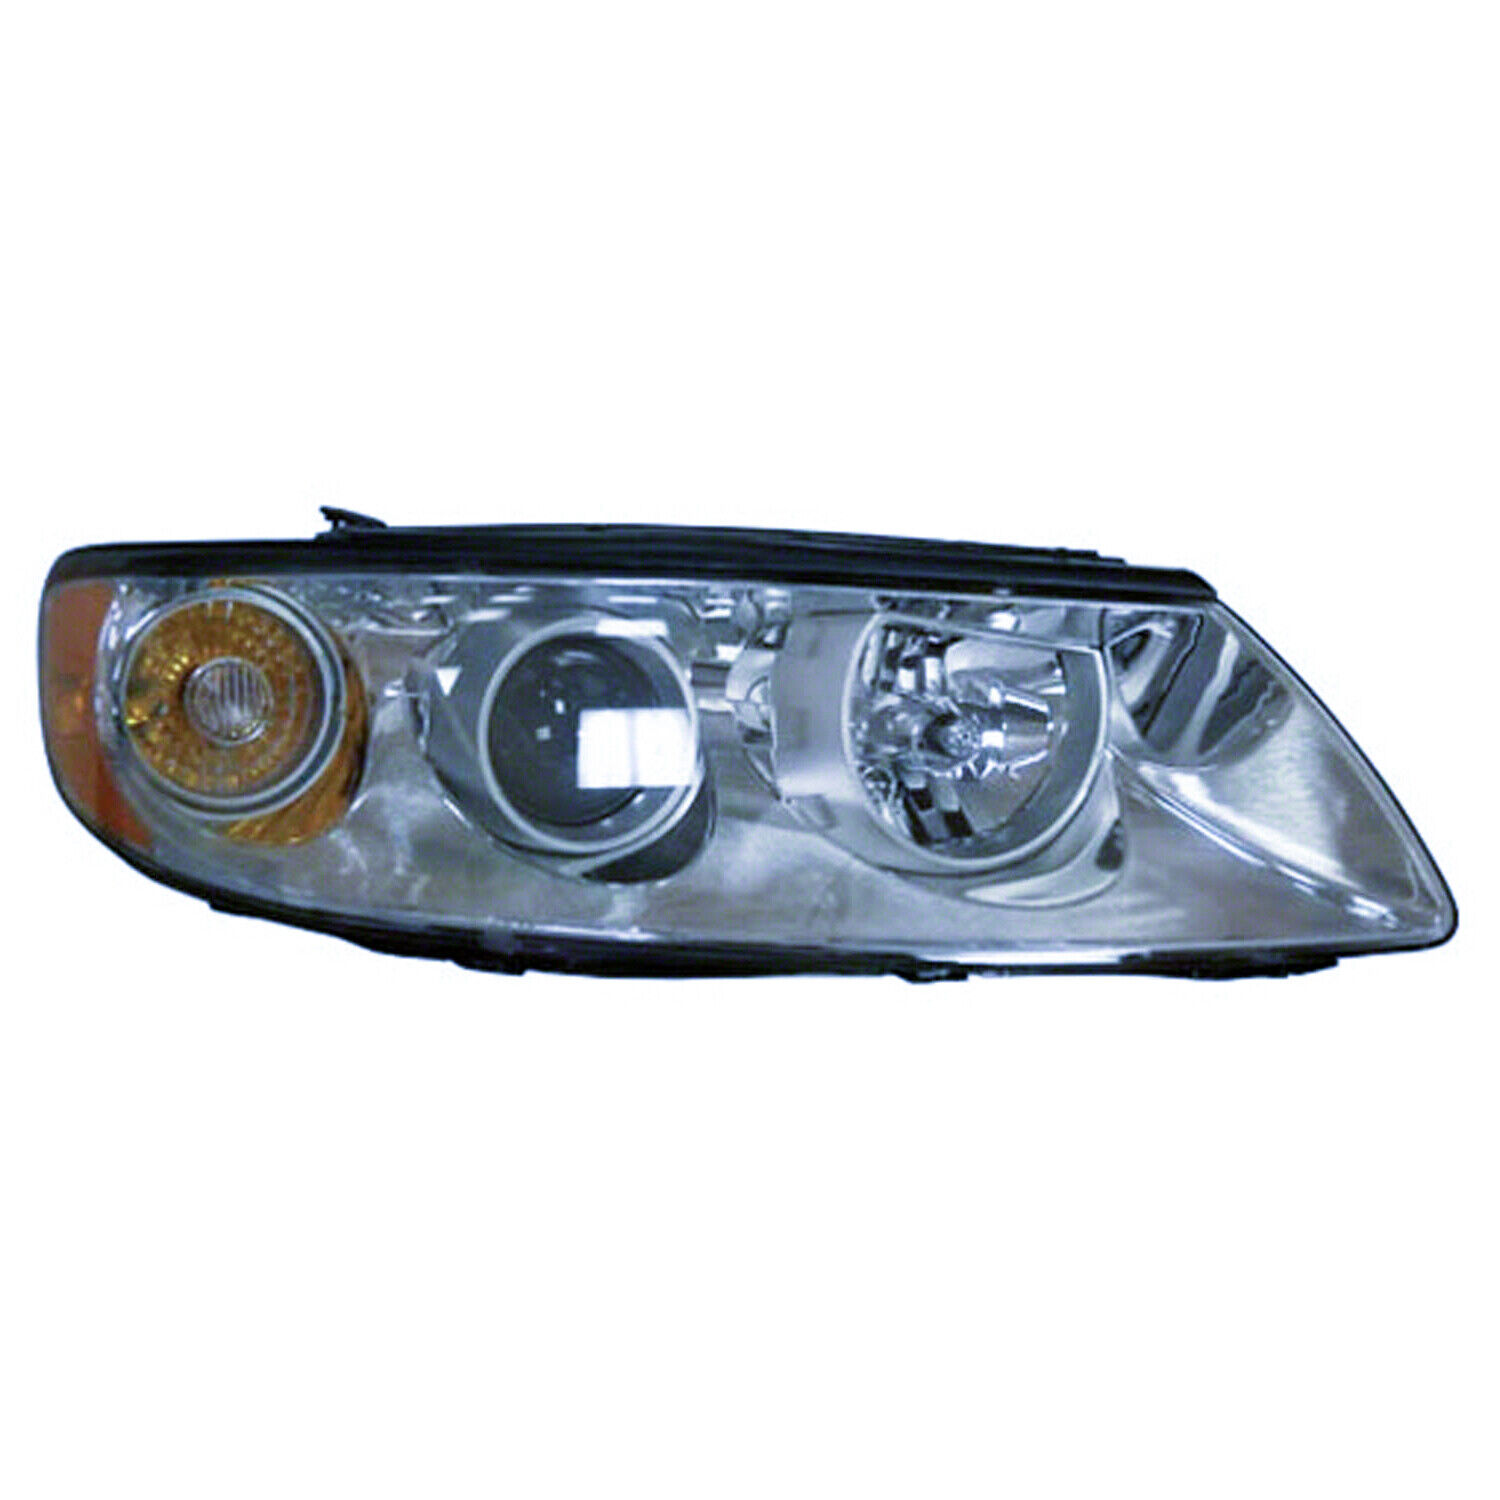 HY2503145 New Head Lamp Assembly Passenger Side